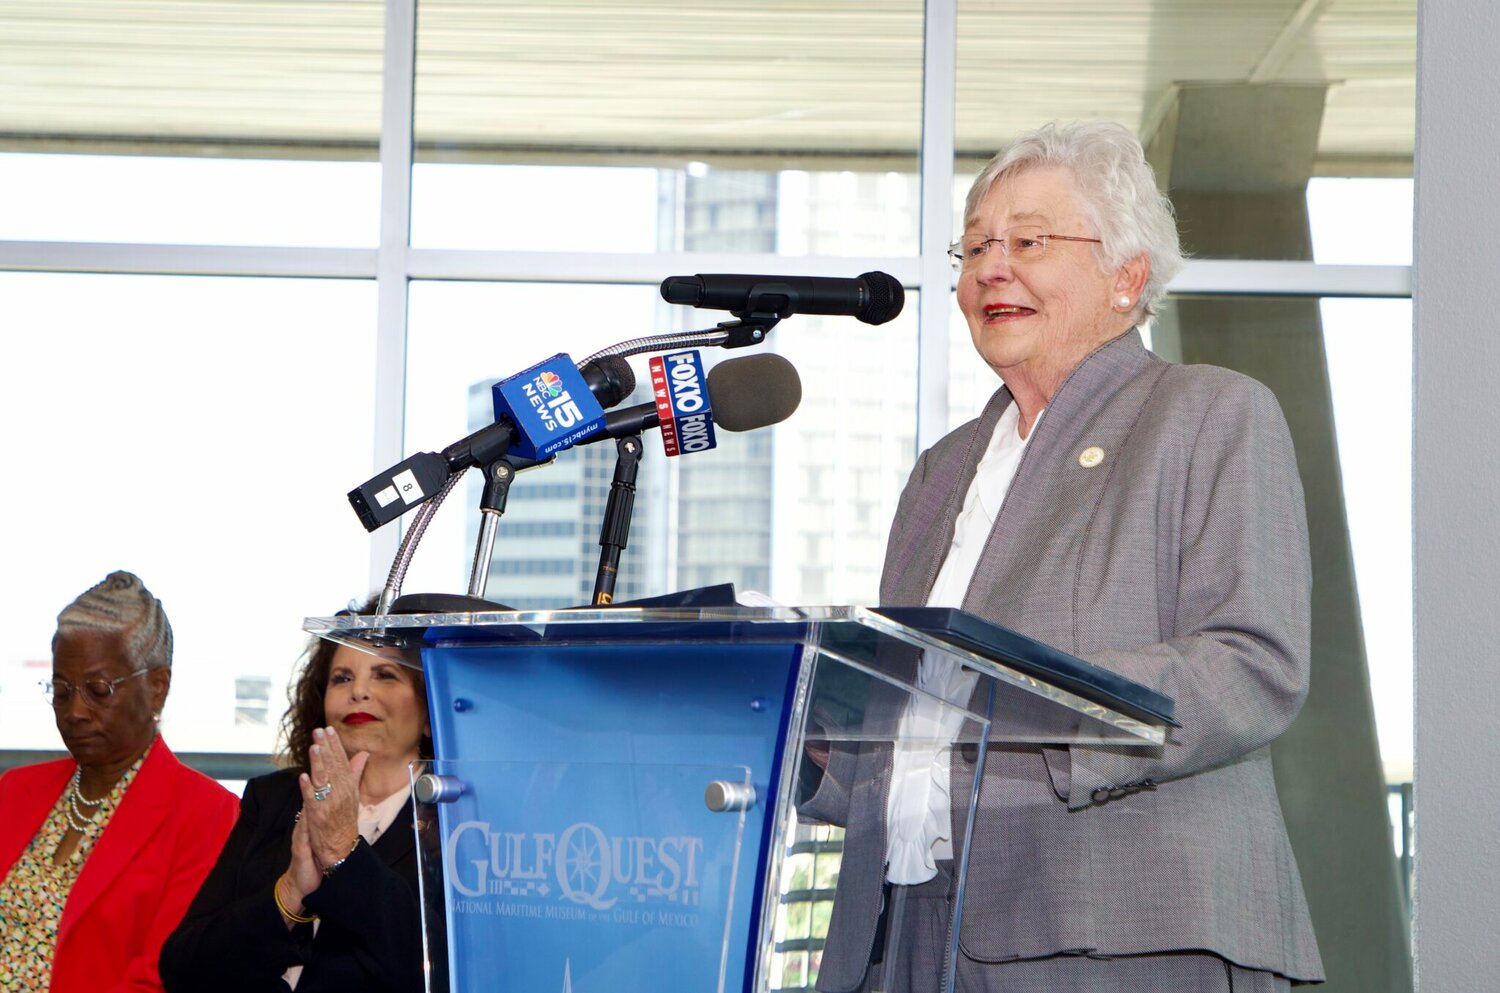 Gov. Kay Ivey announced Friday, July 14, $67 million in the newest round of GoMESA funding for local projects, which will include $2 million to build a new amphitheater in Robertsdale Centennial Park.